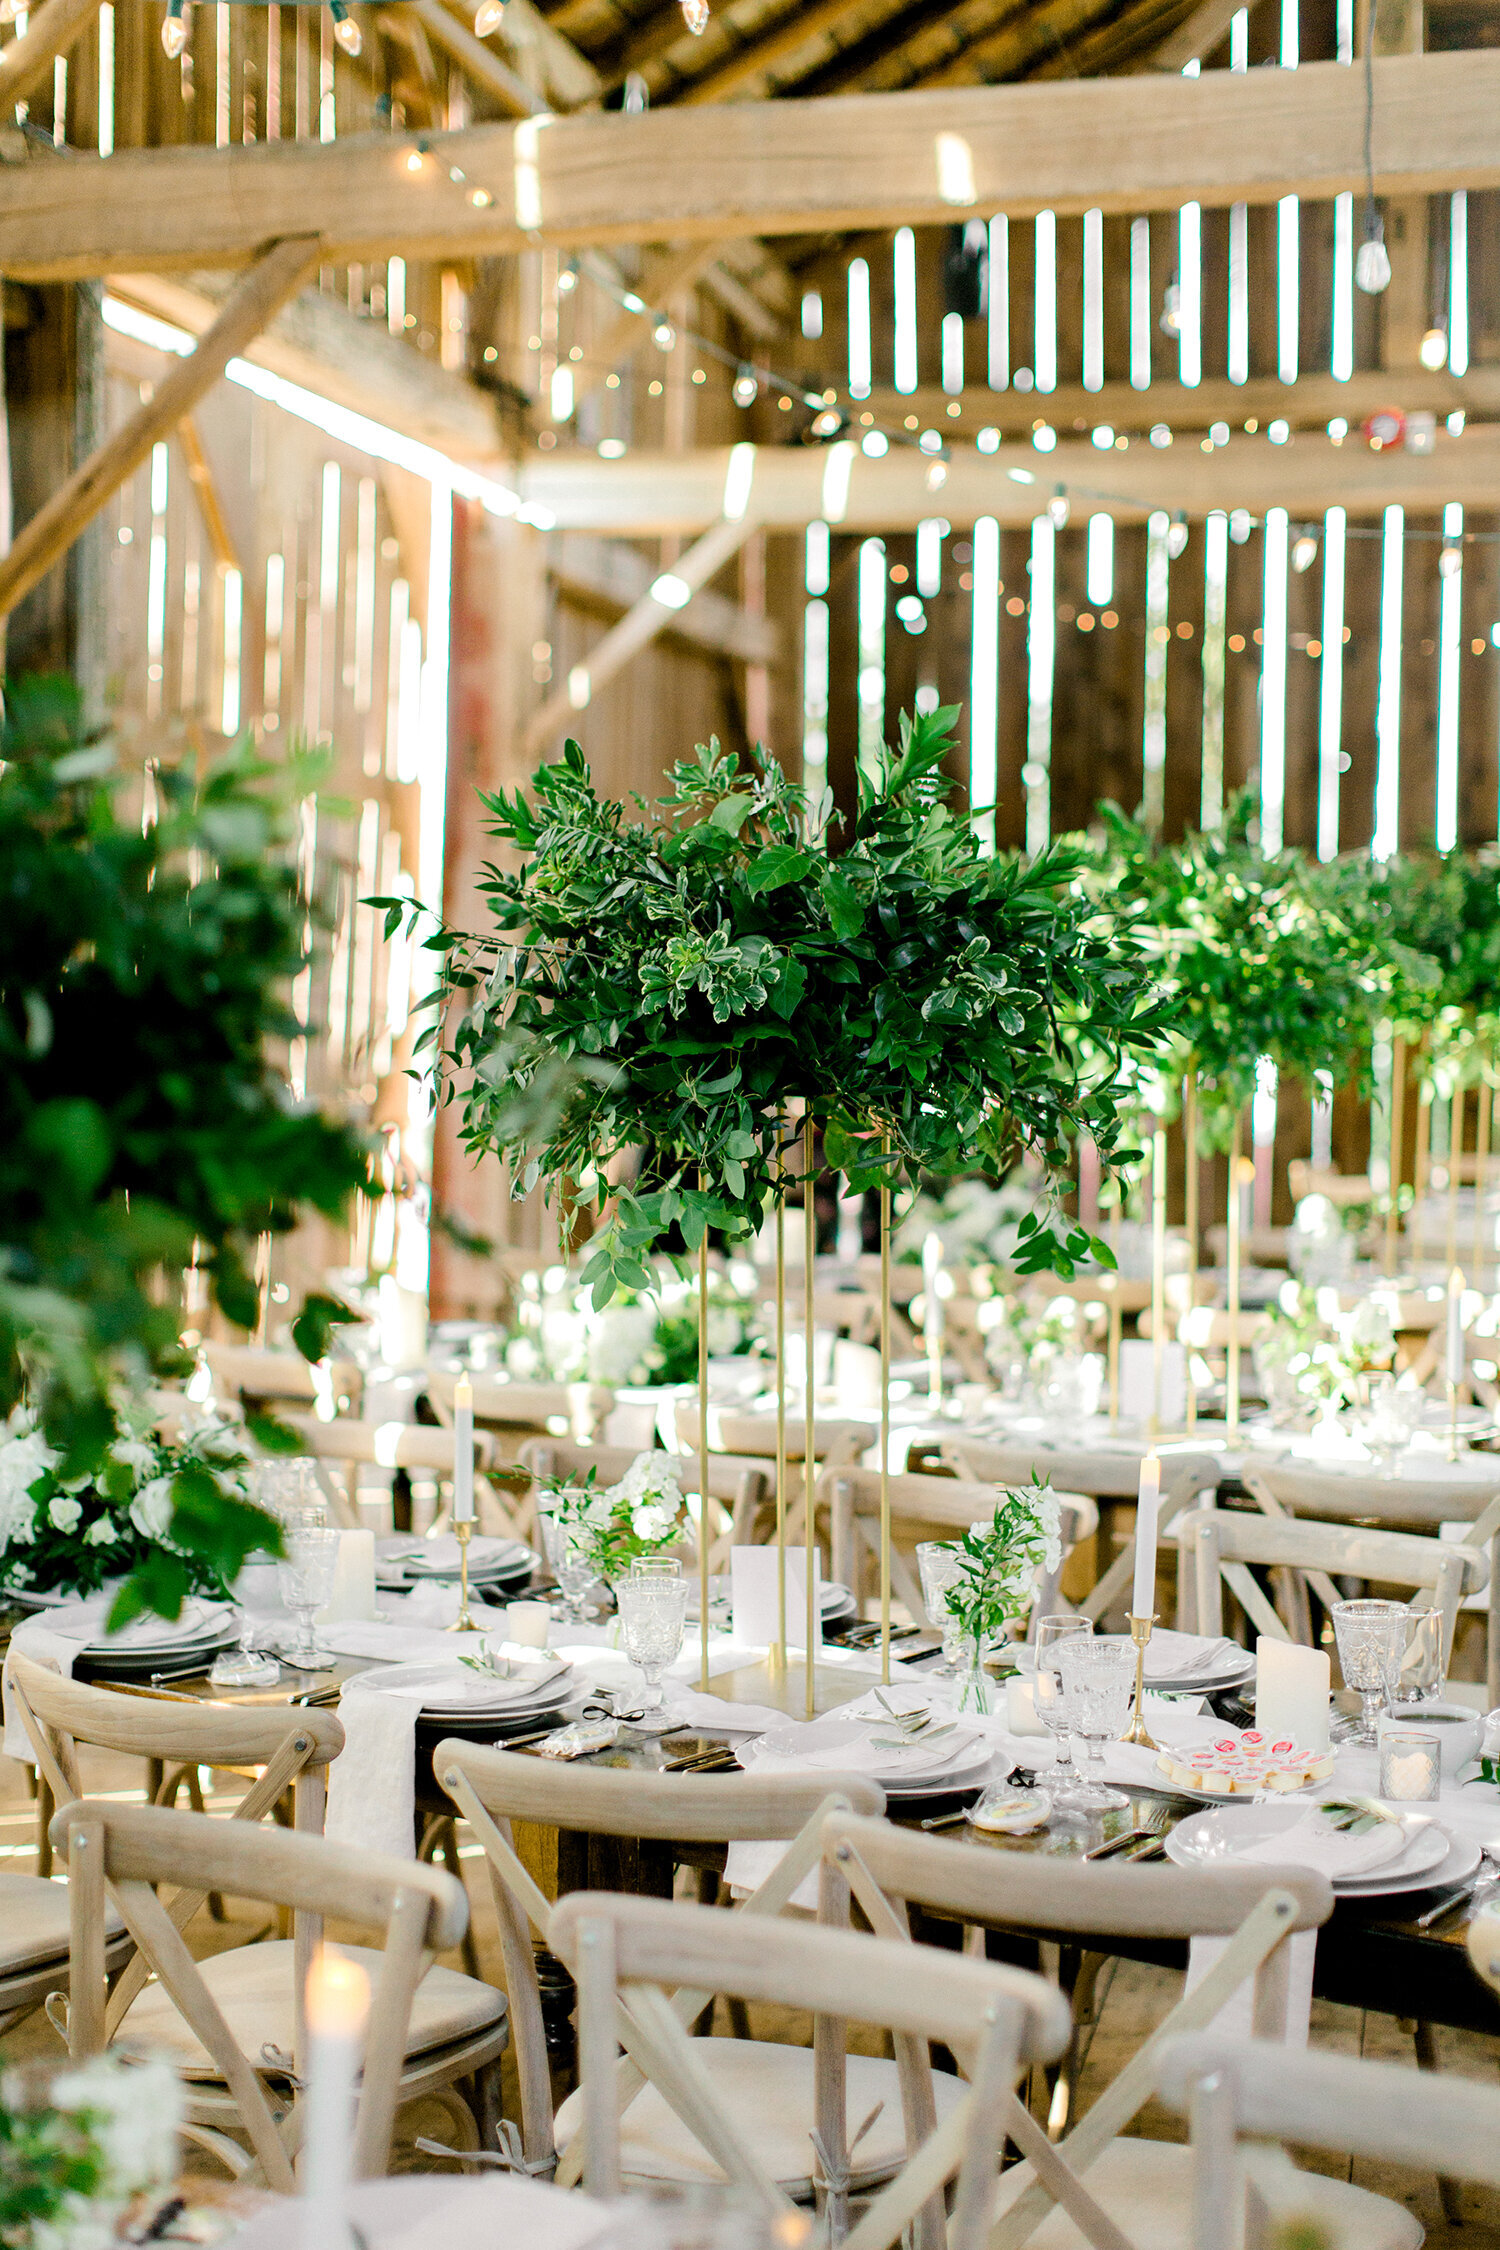 Cambium Farms Forever Wildfield Wedluxe Richelle Hunter 9